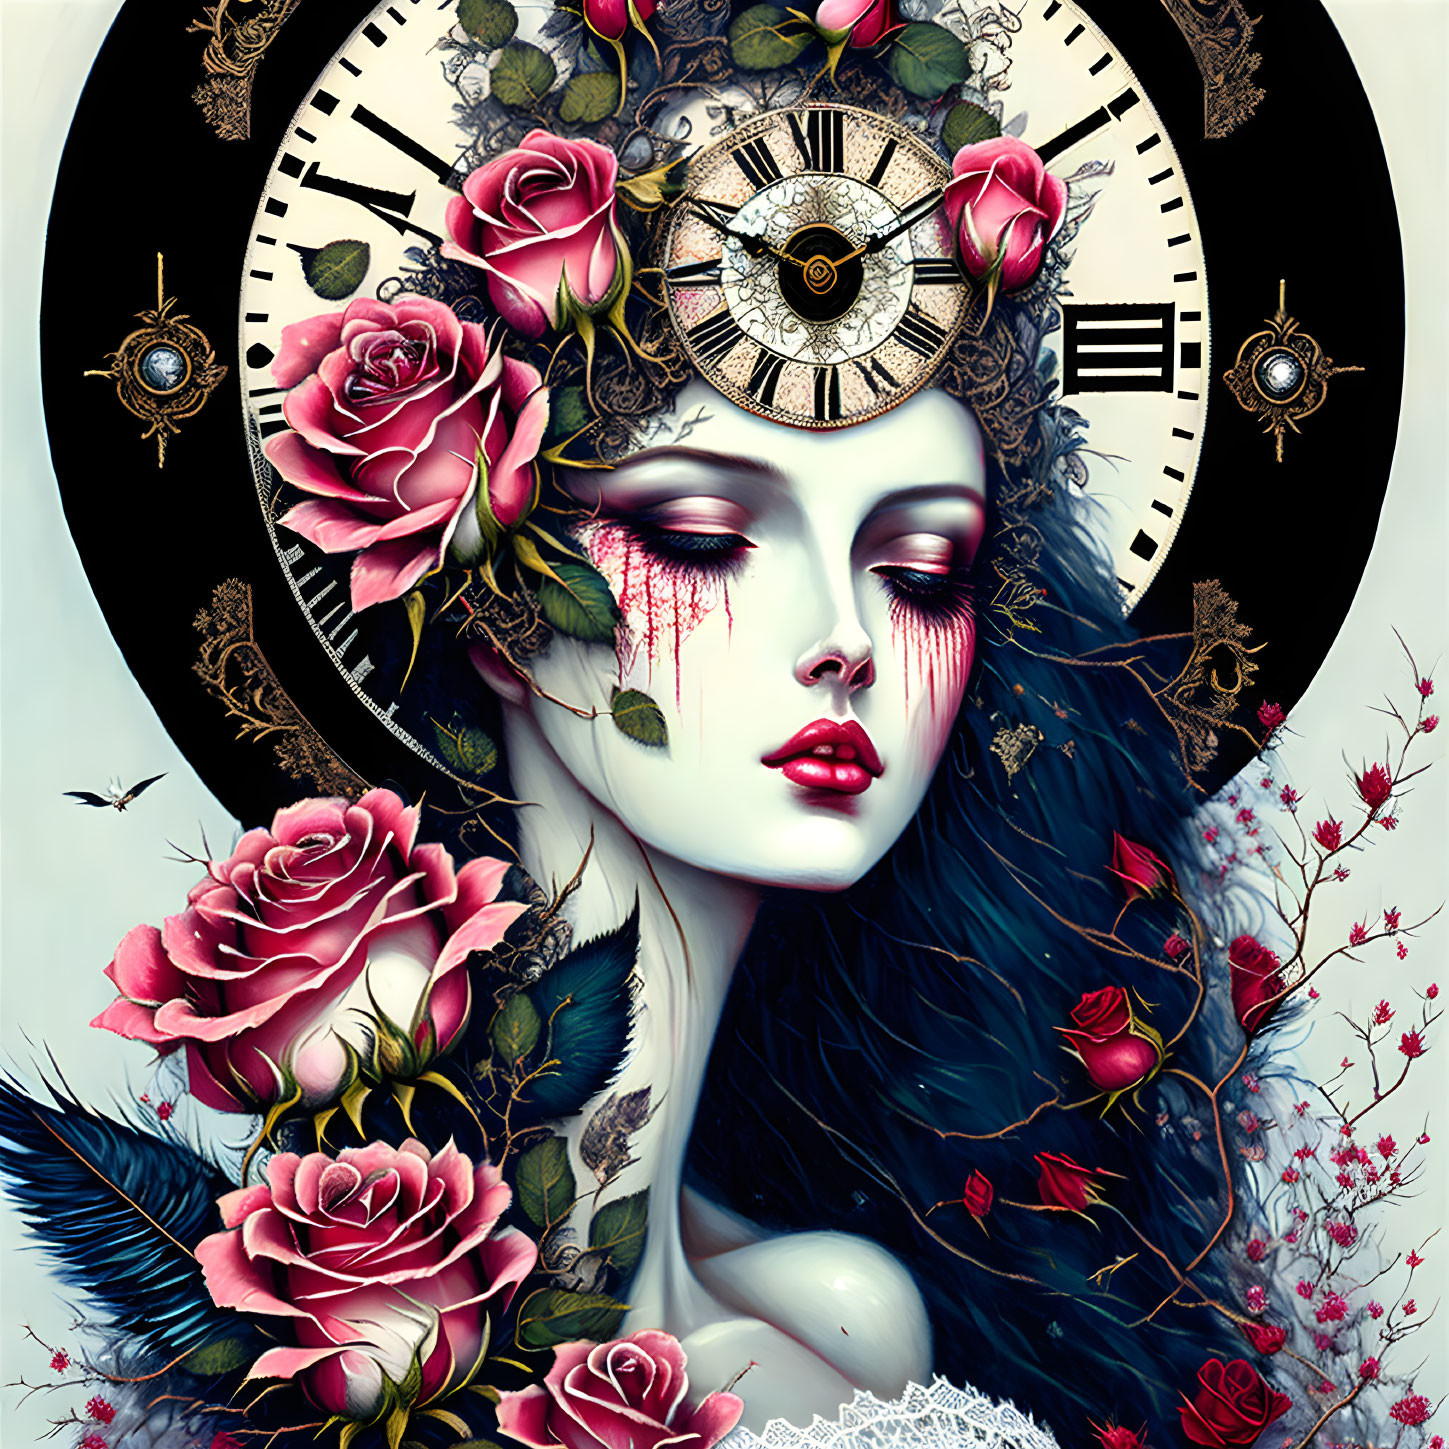 Surreal artwork featuring woman's face, roses, clock elements, and ornamental details